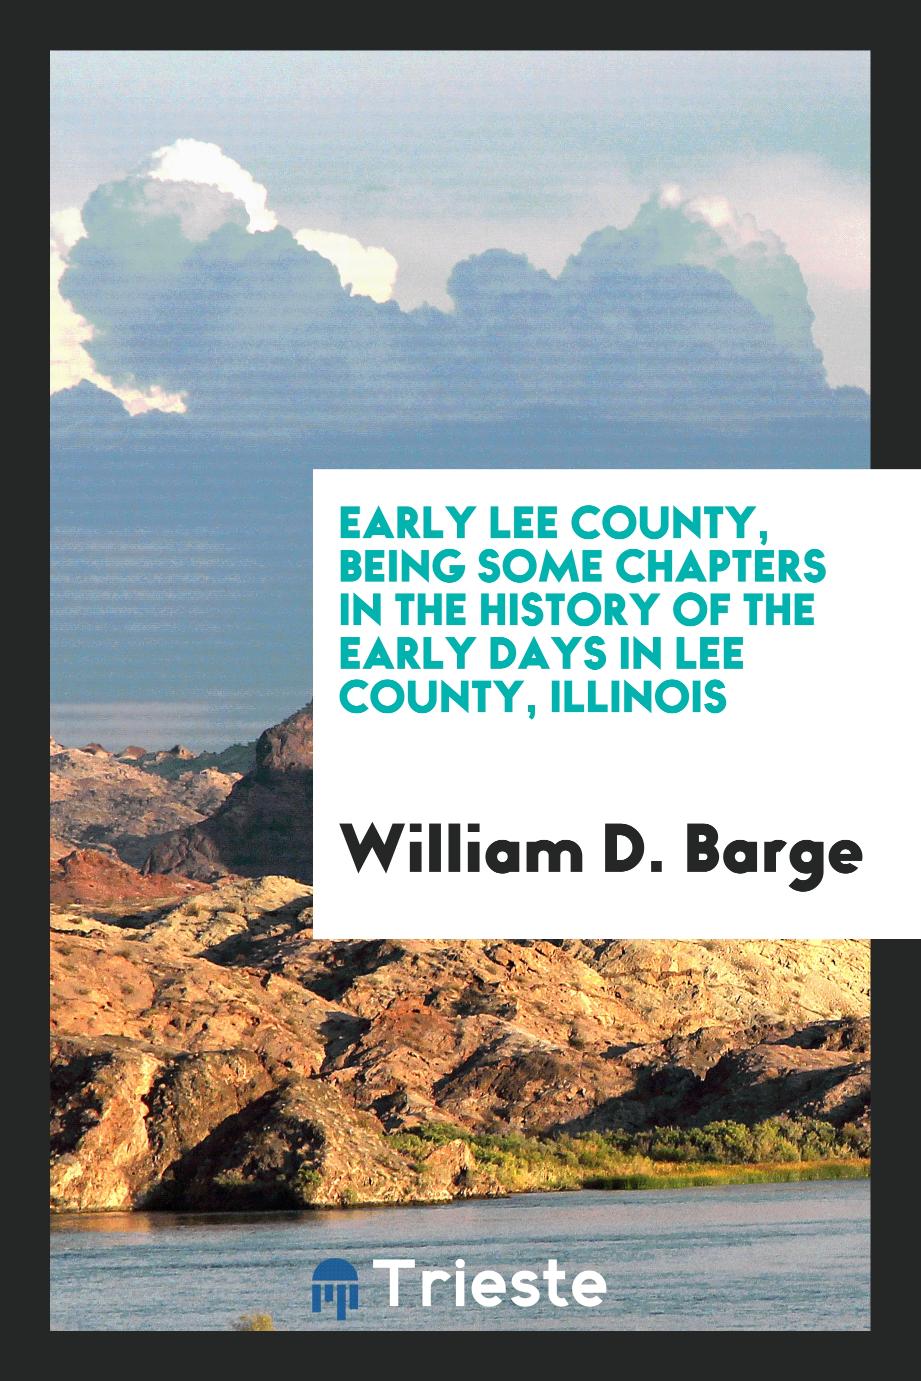 Early Lee County, Being Some Chapters in the History of the Early Days in Lee County, Illinois